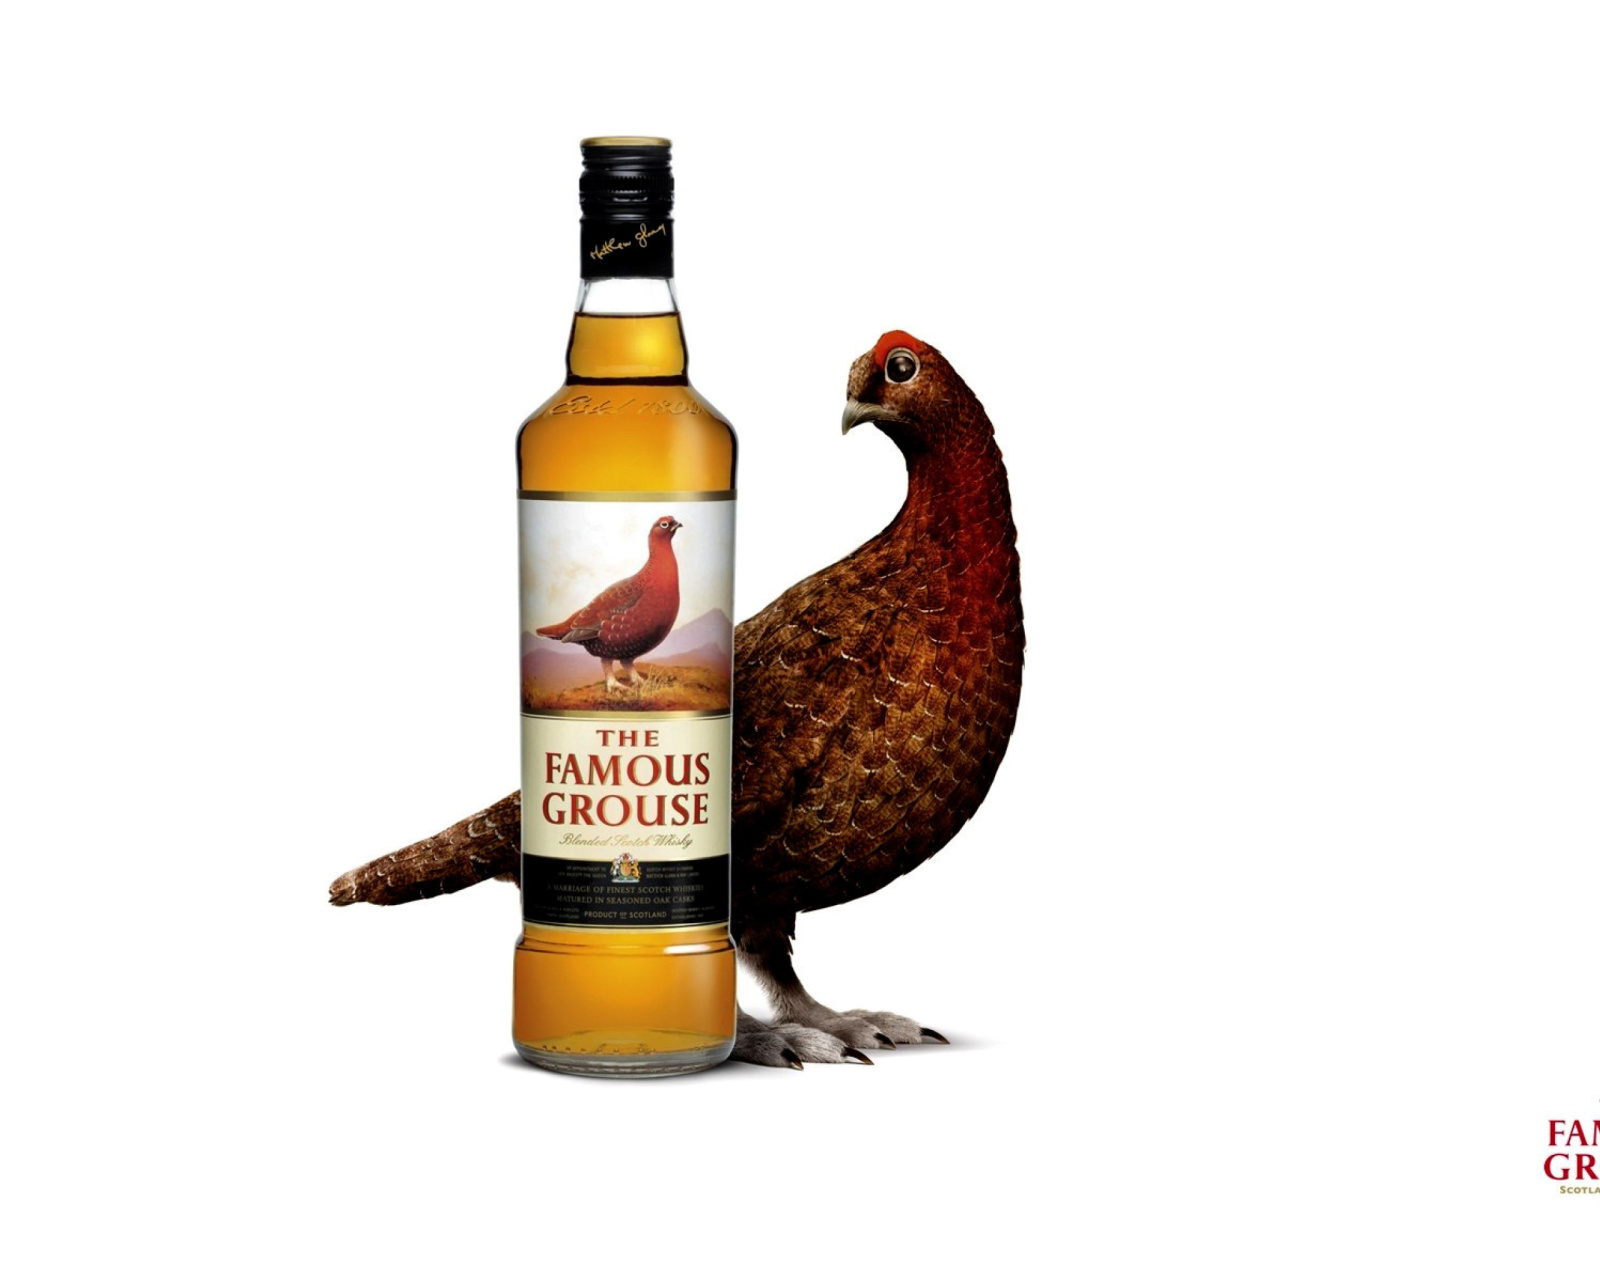 Das The Famous Grouse Scotch Whisky Wallpaper 1600x1280